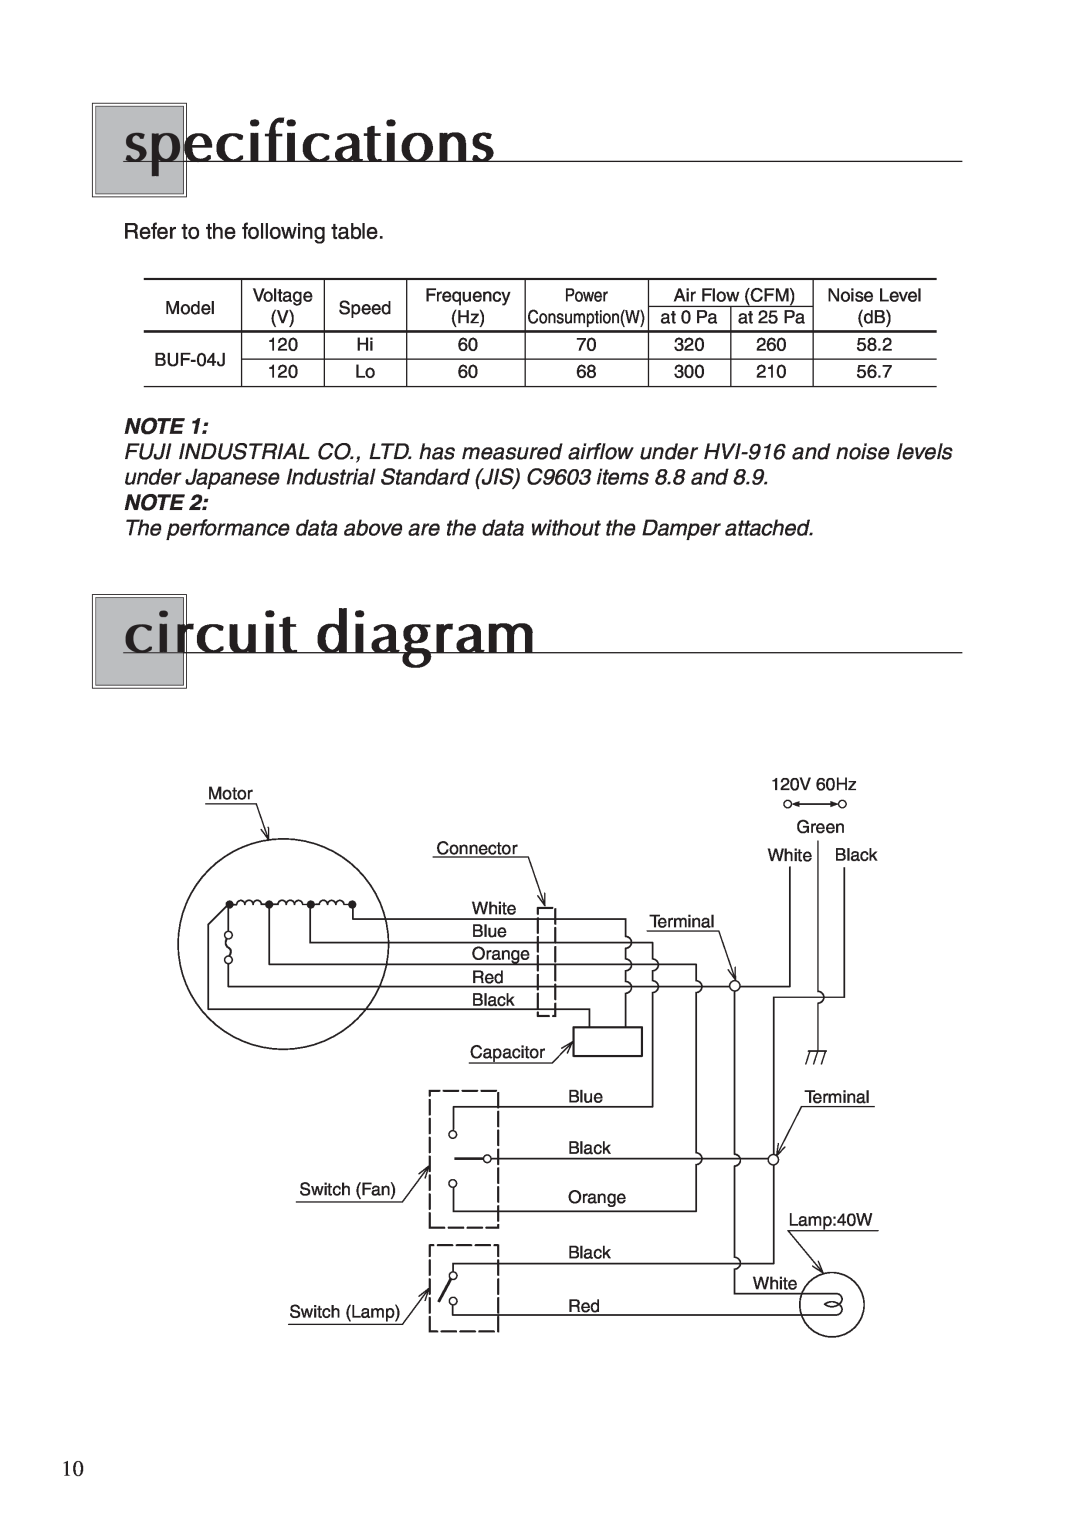 Fujioh BUF-04J operation manual specifications, circuit diagram, Refer to the following table 